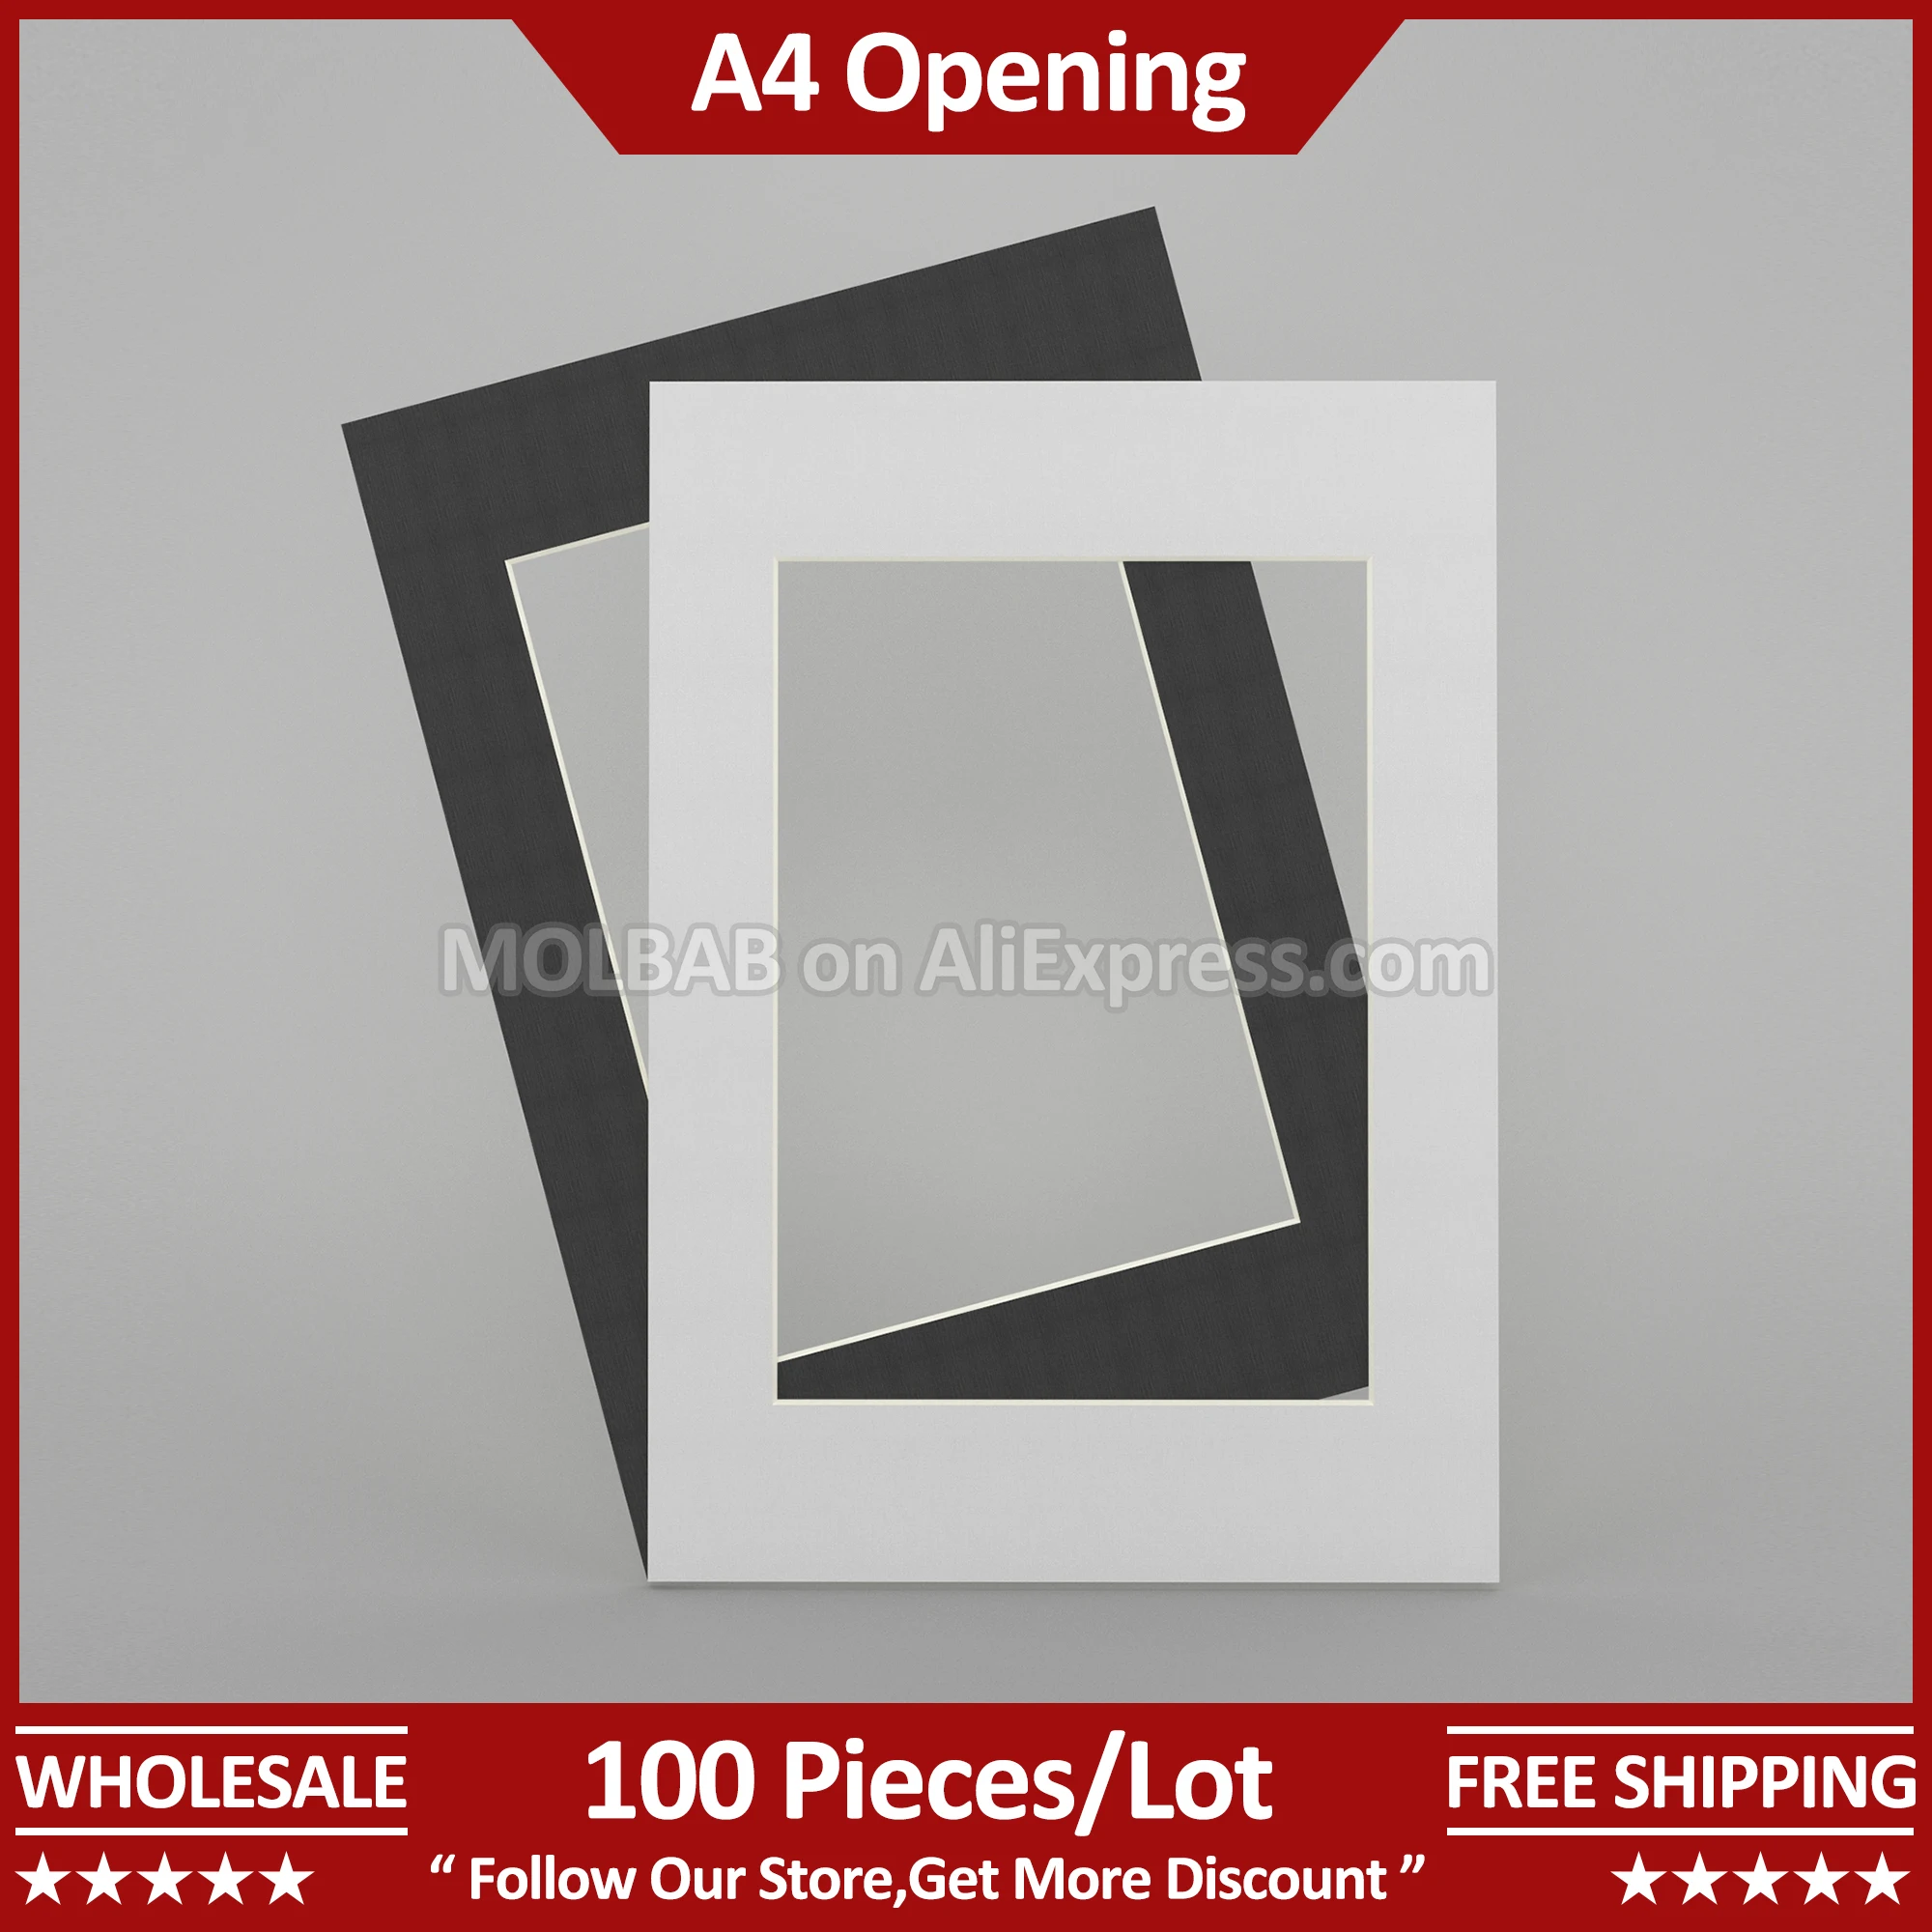 

A3 Photo Mat A4 Opening White/Black Paperboard Picture Passe-partout Frame Mounting Decoration Wholesale 100 Pieces Per Lot